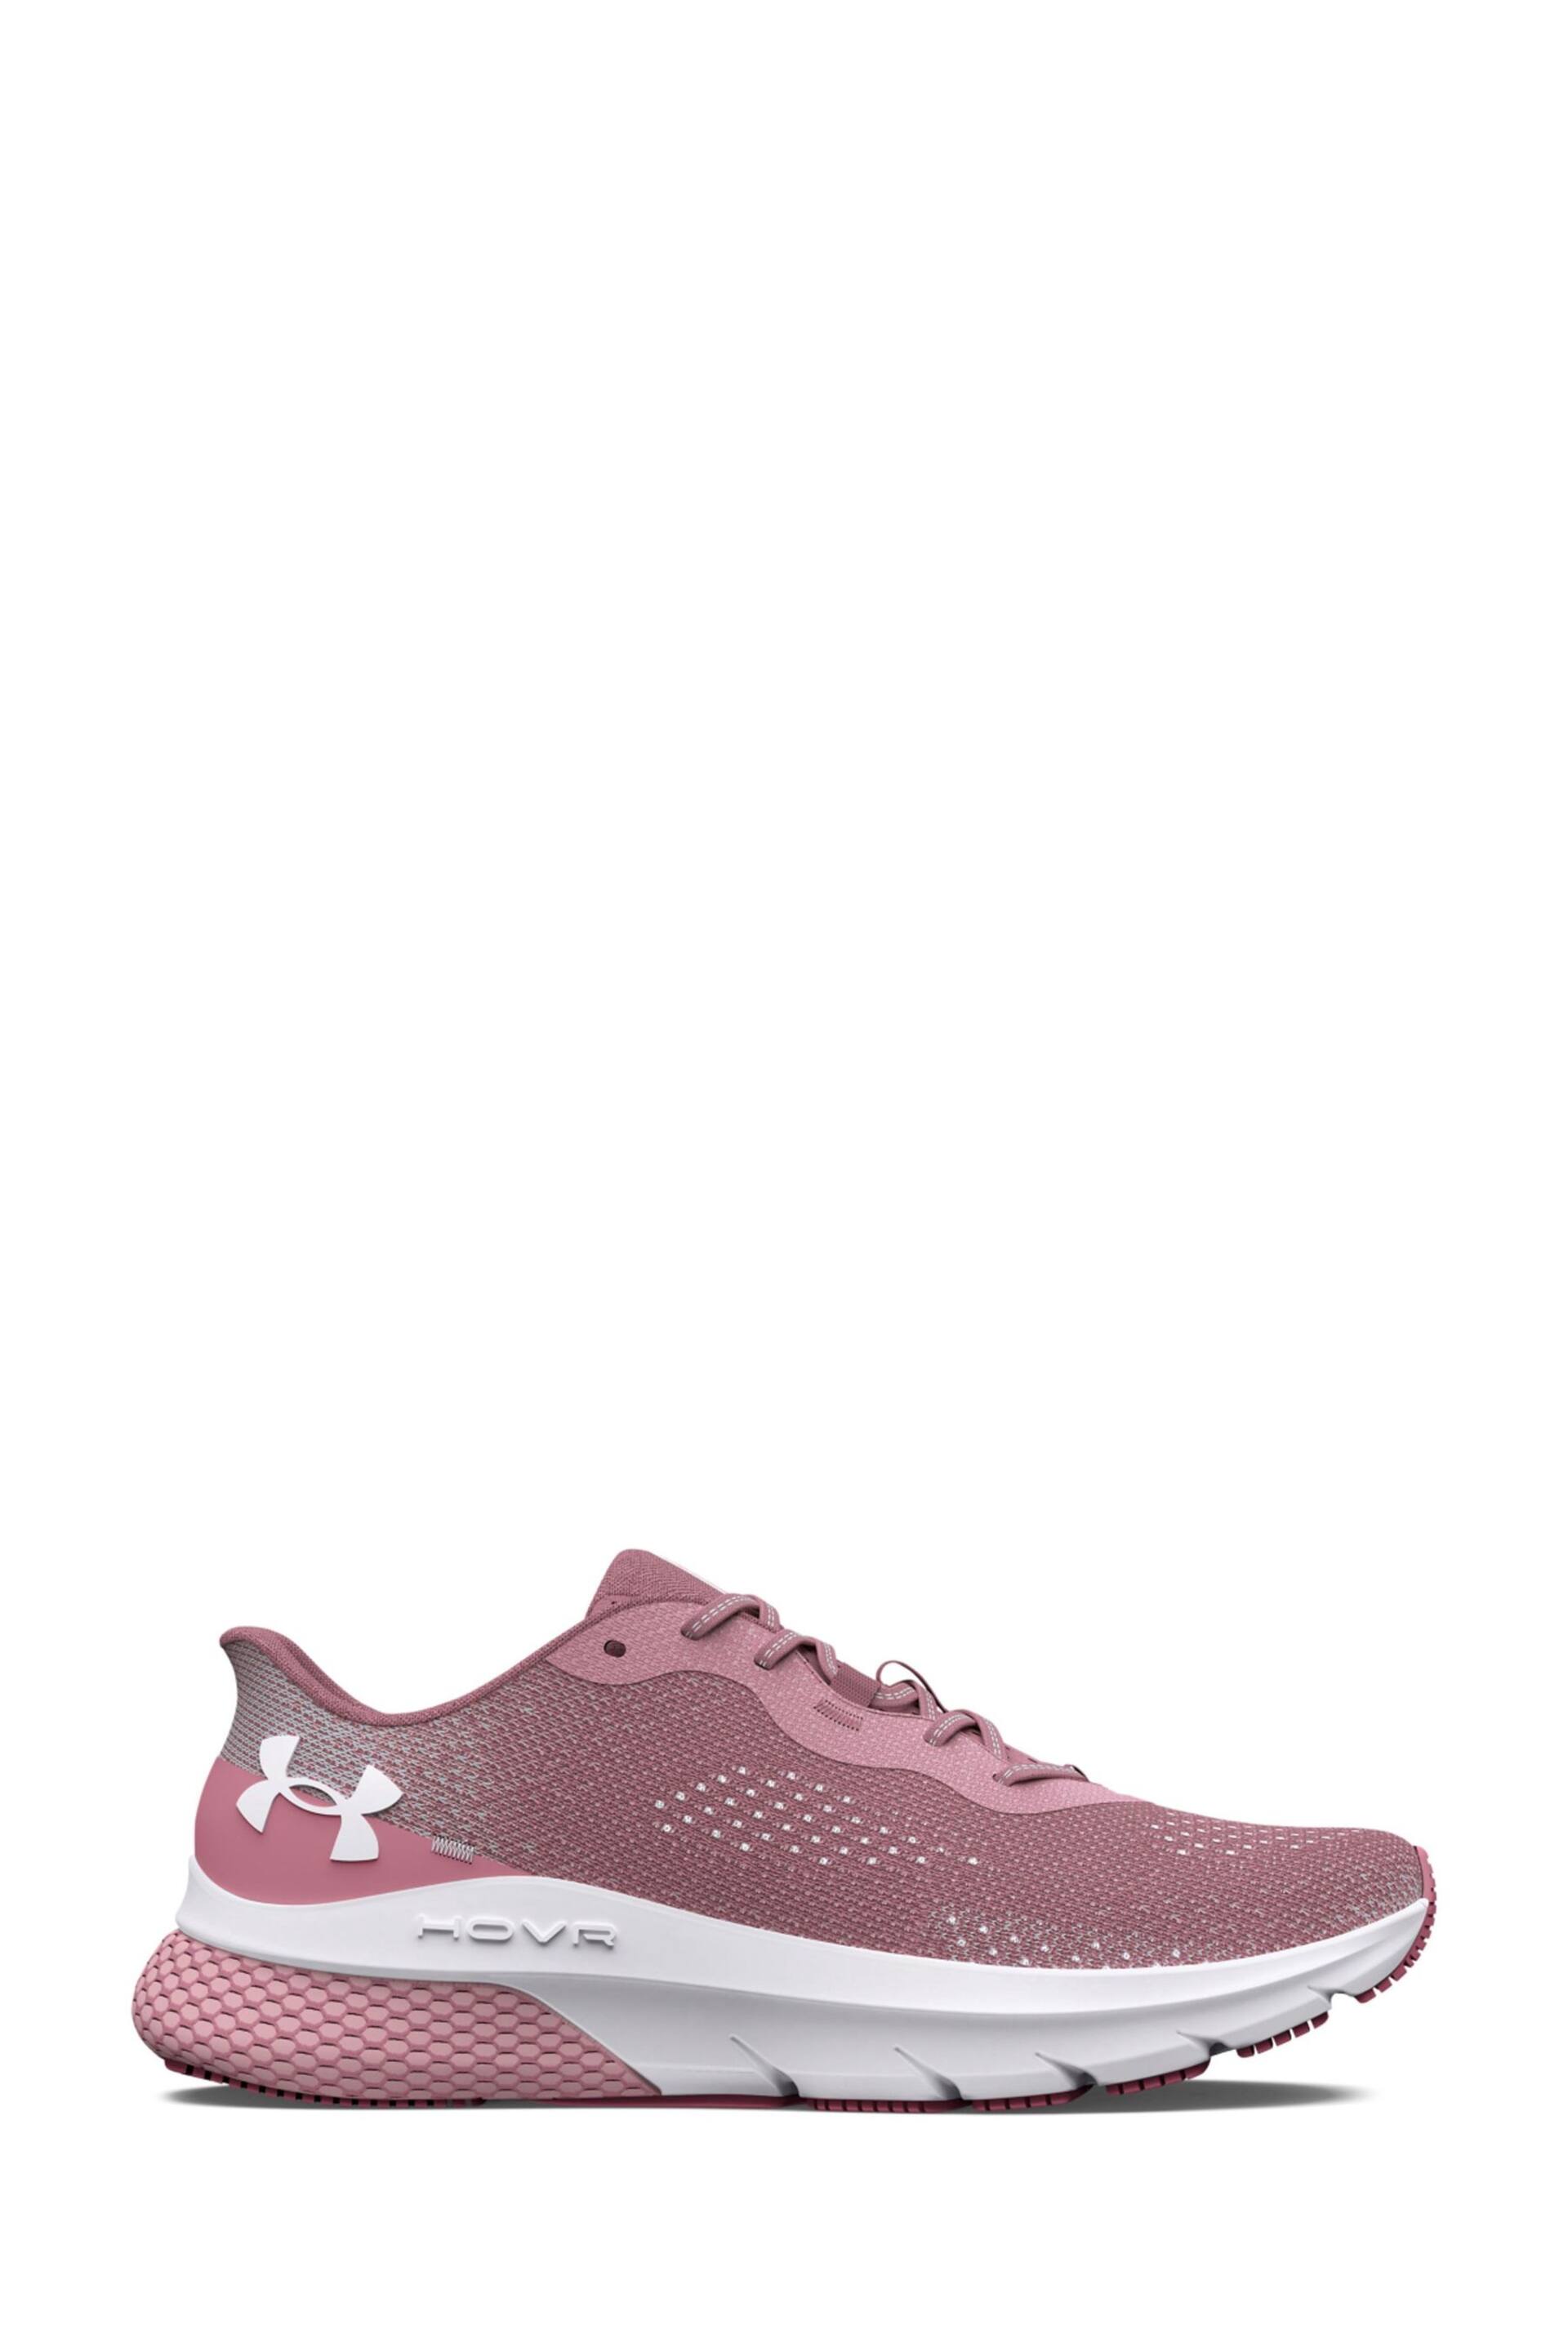 Under Armour Pink HOVR Turbulence 2 Trainers - Image 1 of 8